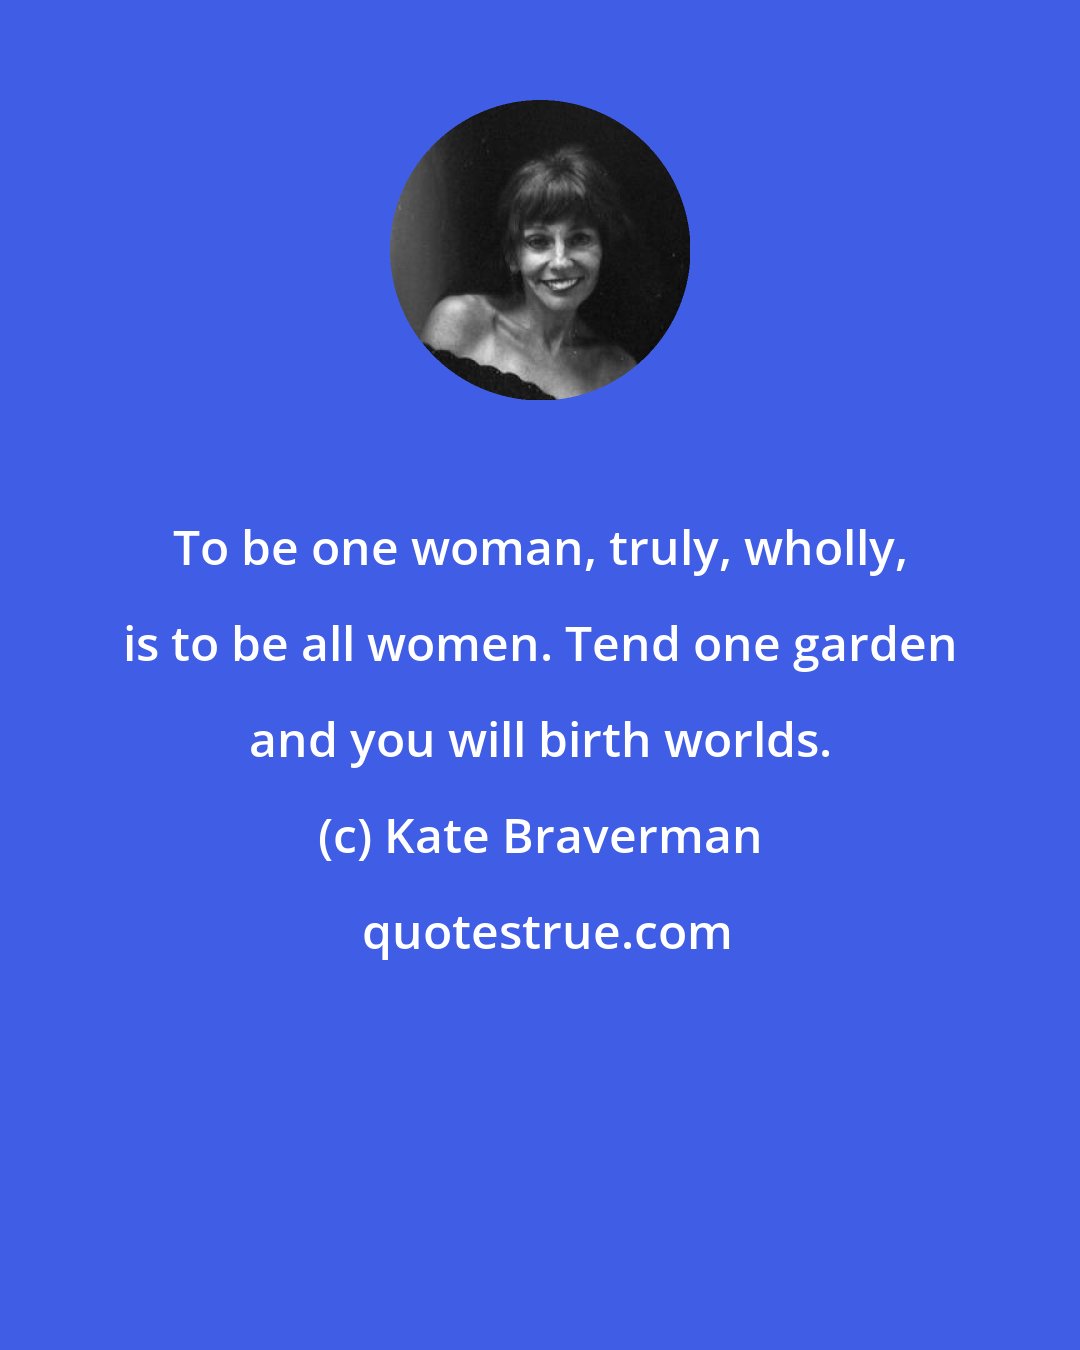 Kate Braverman: To be one woman, truly, wholly, is to be all women. Tend one garden and you will birth worlds.